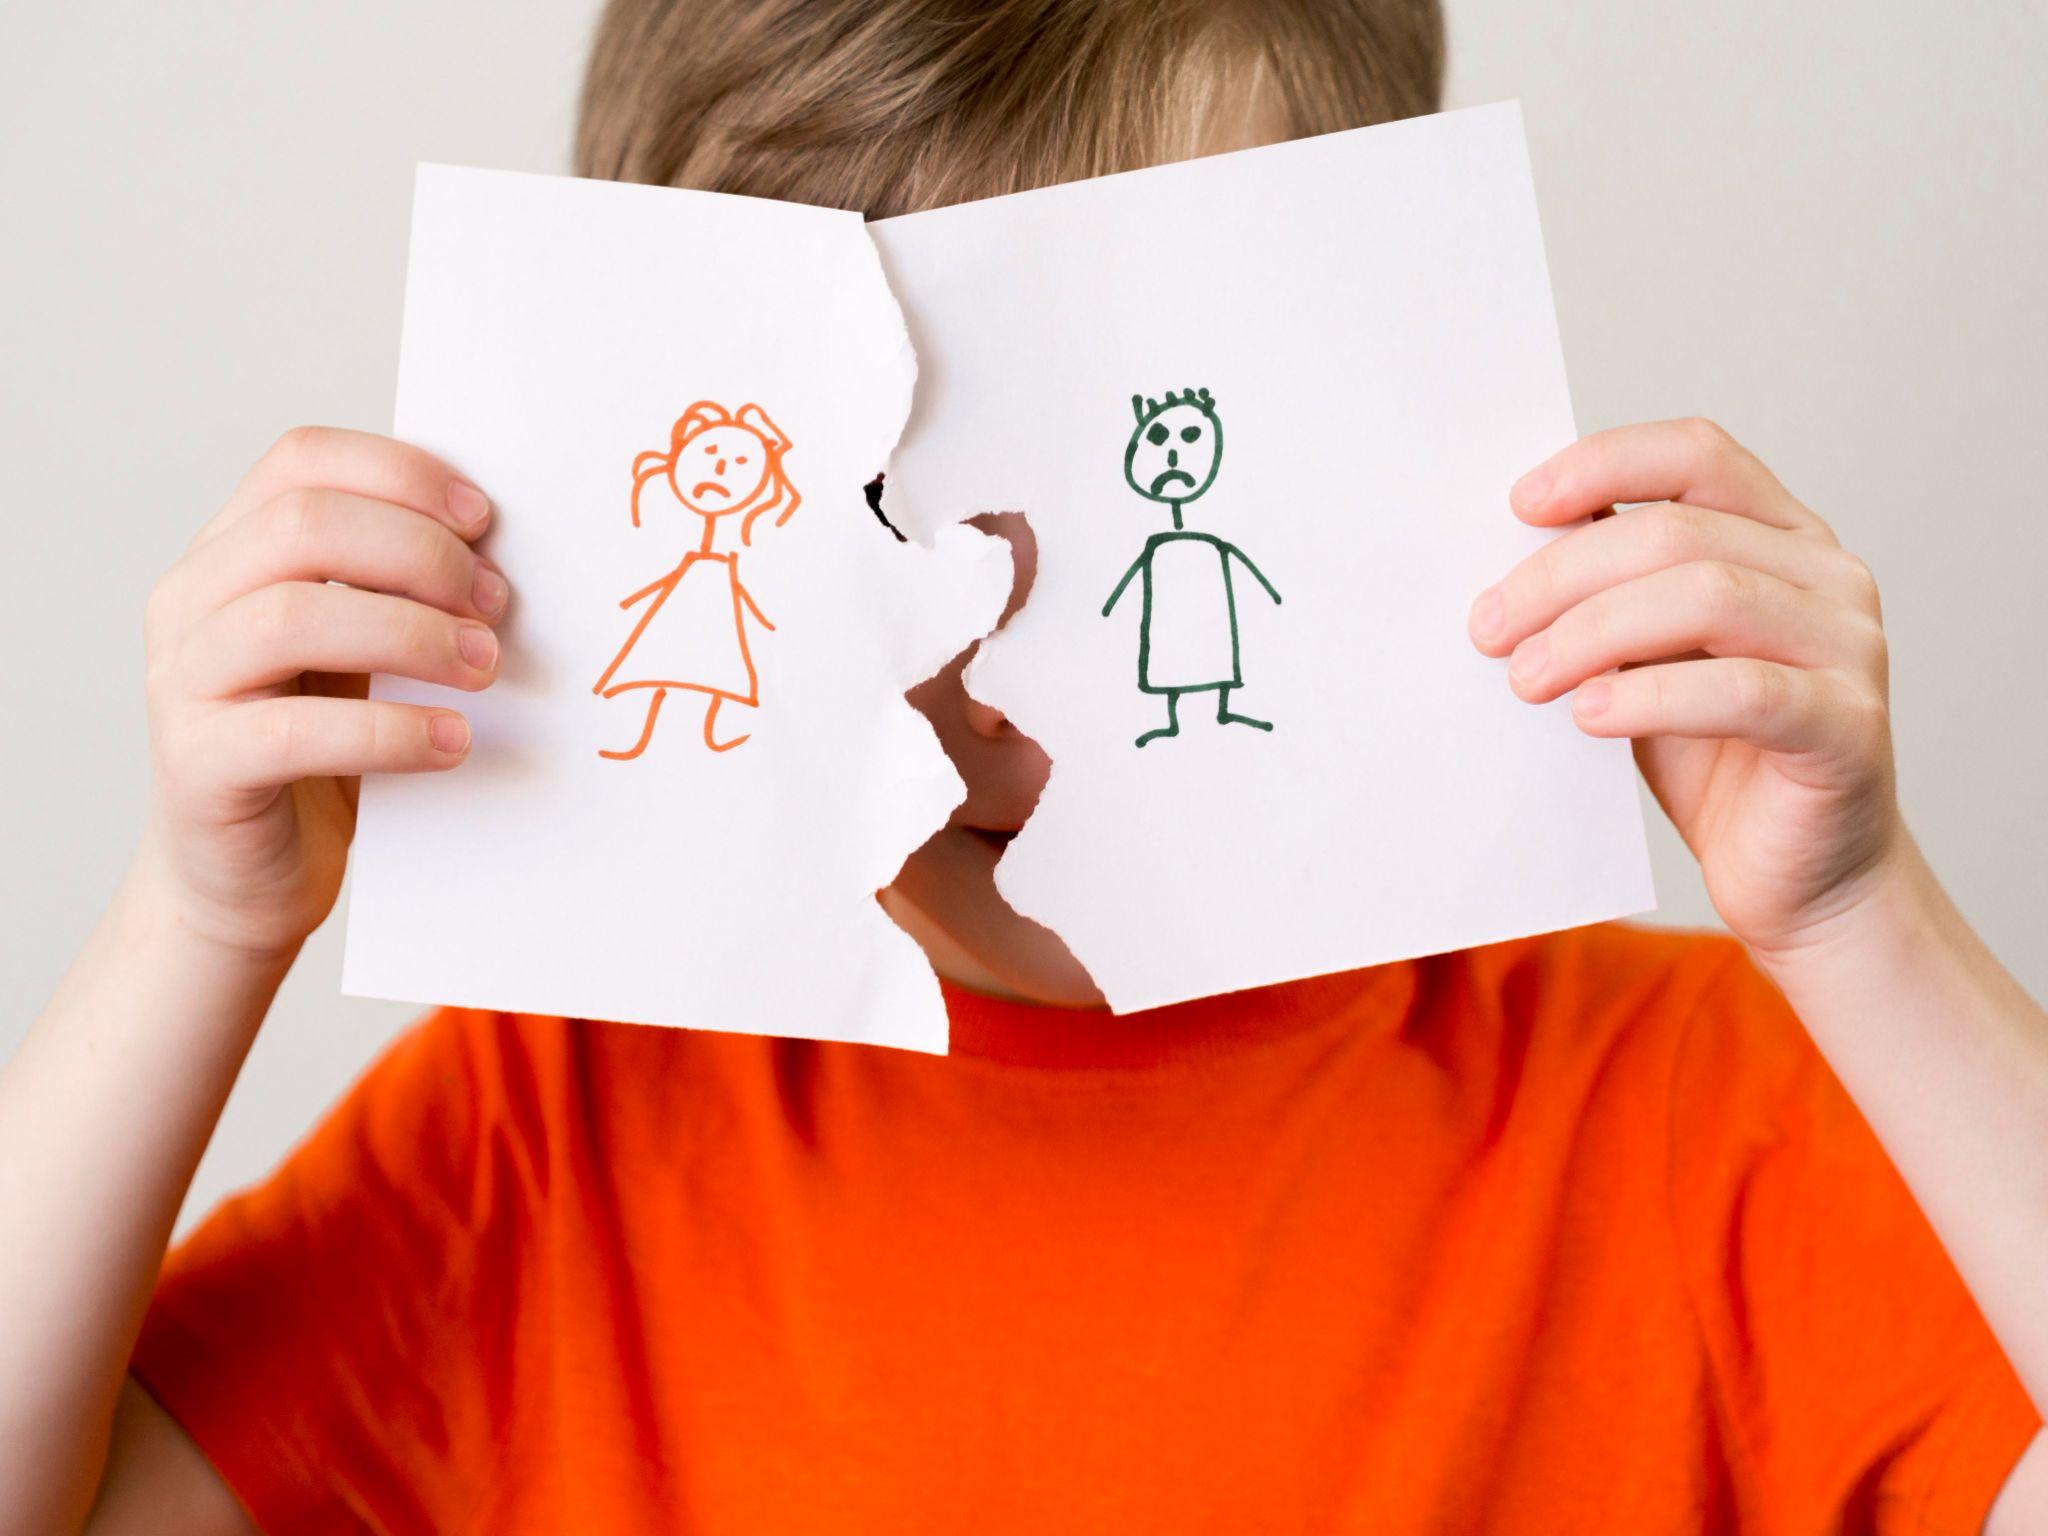 Child holding a torn piece of paper with a drawing of a girl on one half and a boy on the other, symbolizing a split or separation.